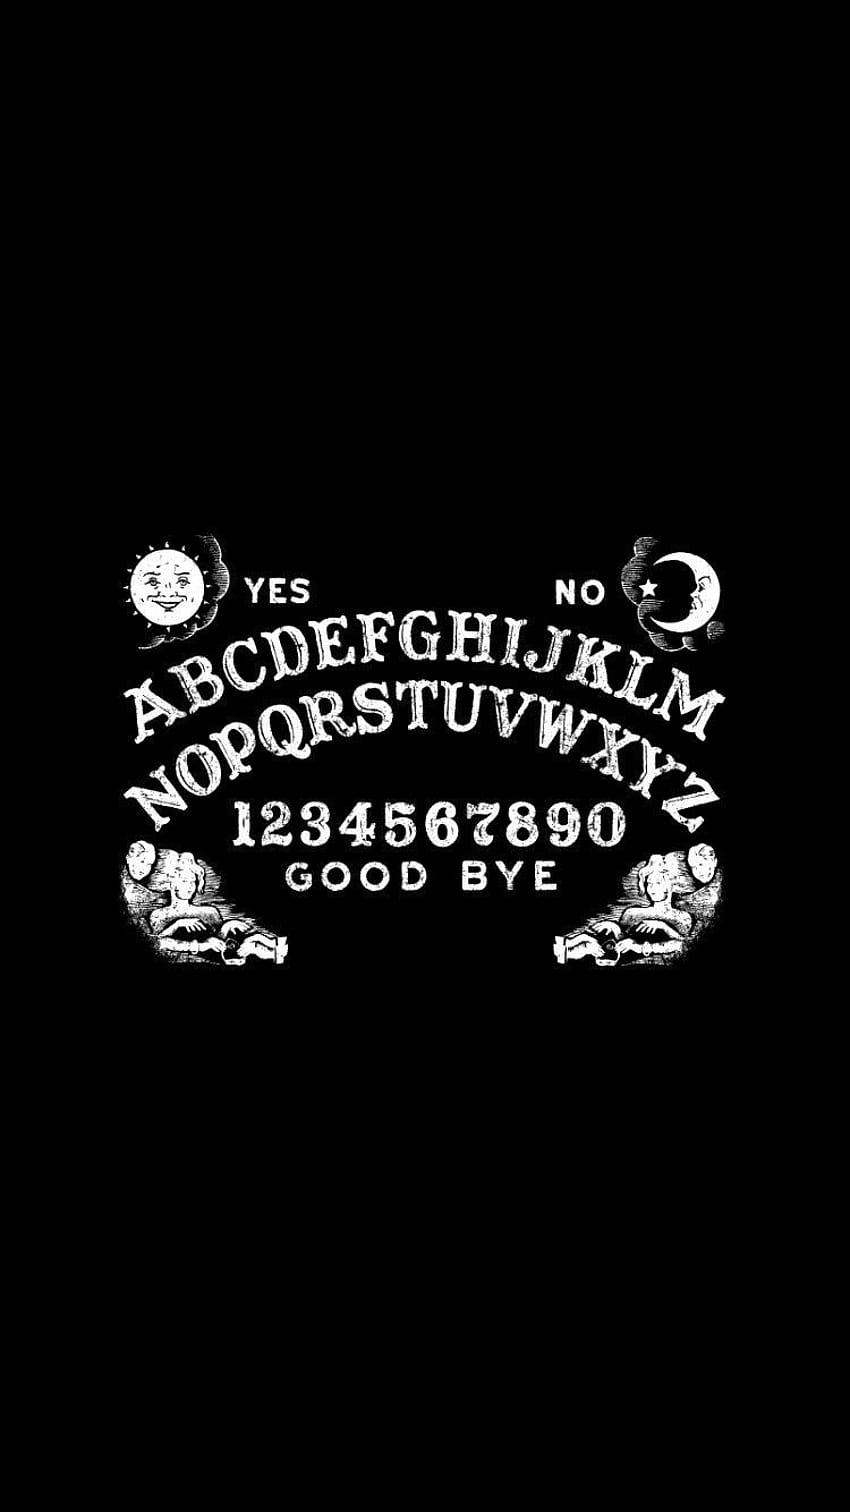 Ouija board wallpaper for your phone - Creepy